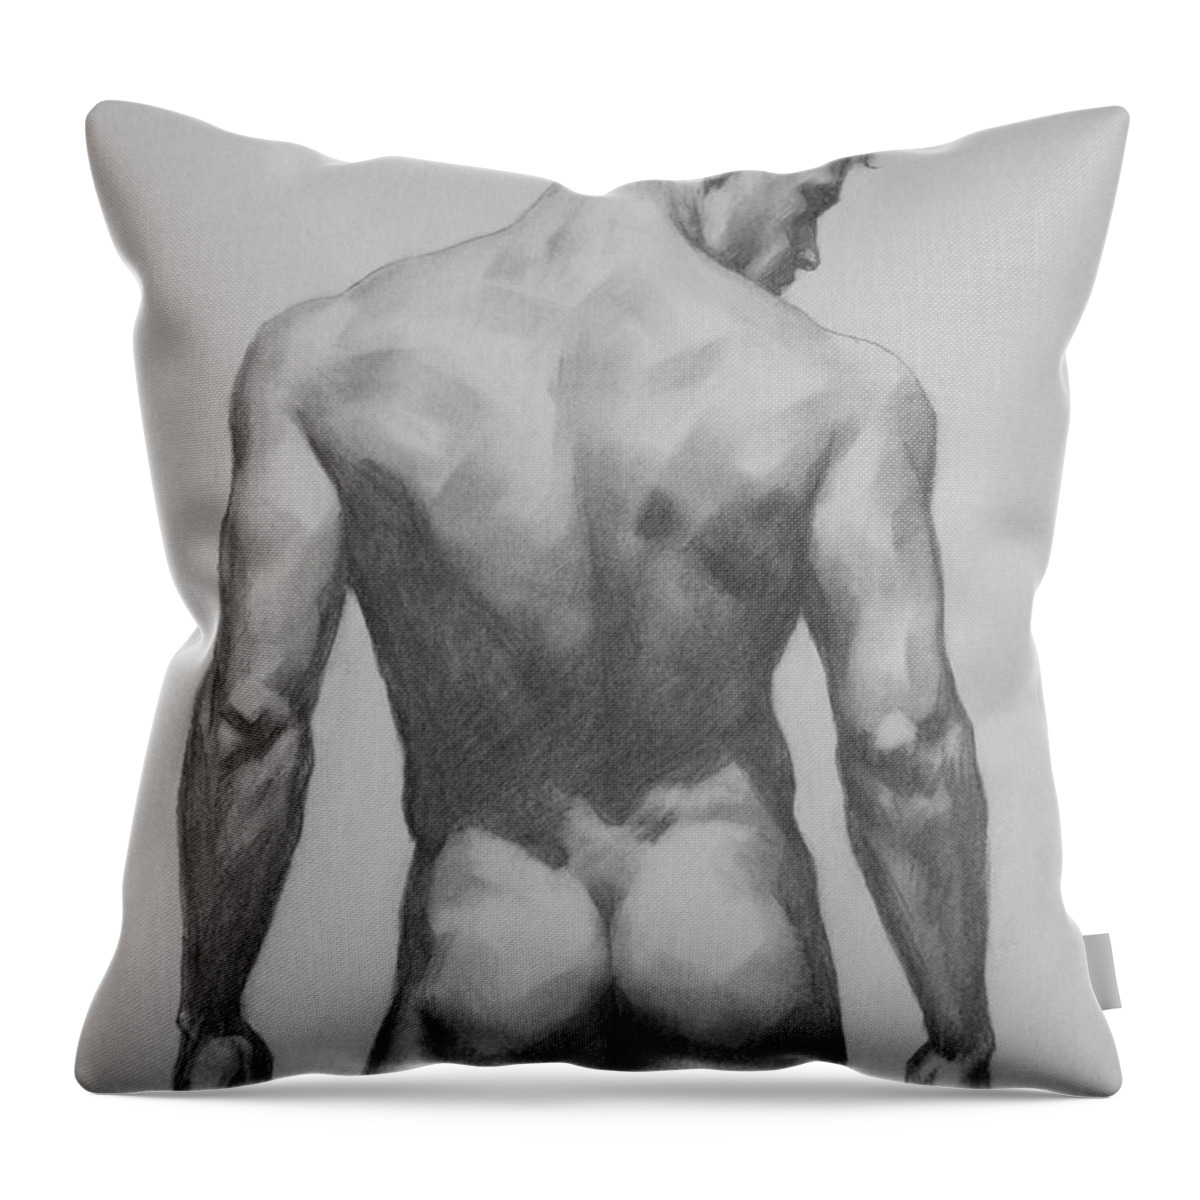 Original Drawing Throw Pillow featuring the drawing Original Drawing Artwork Male Nude Men On Paper #16-1-7 by Hongtao Huang